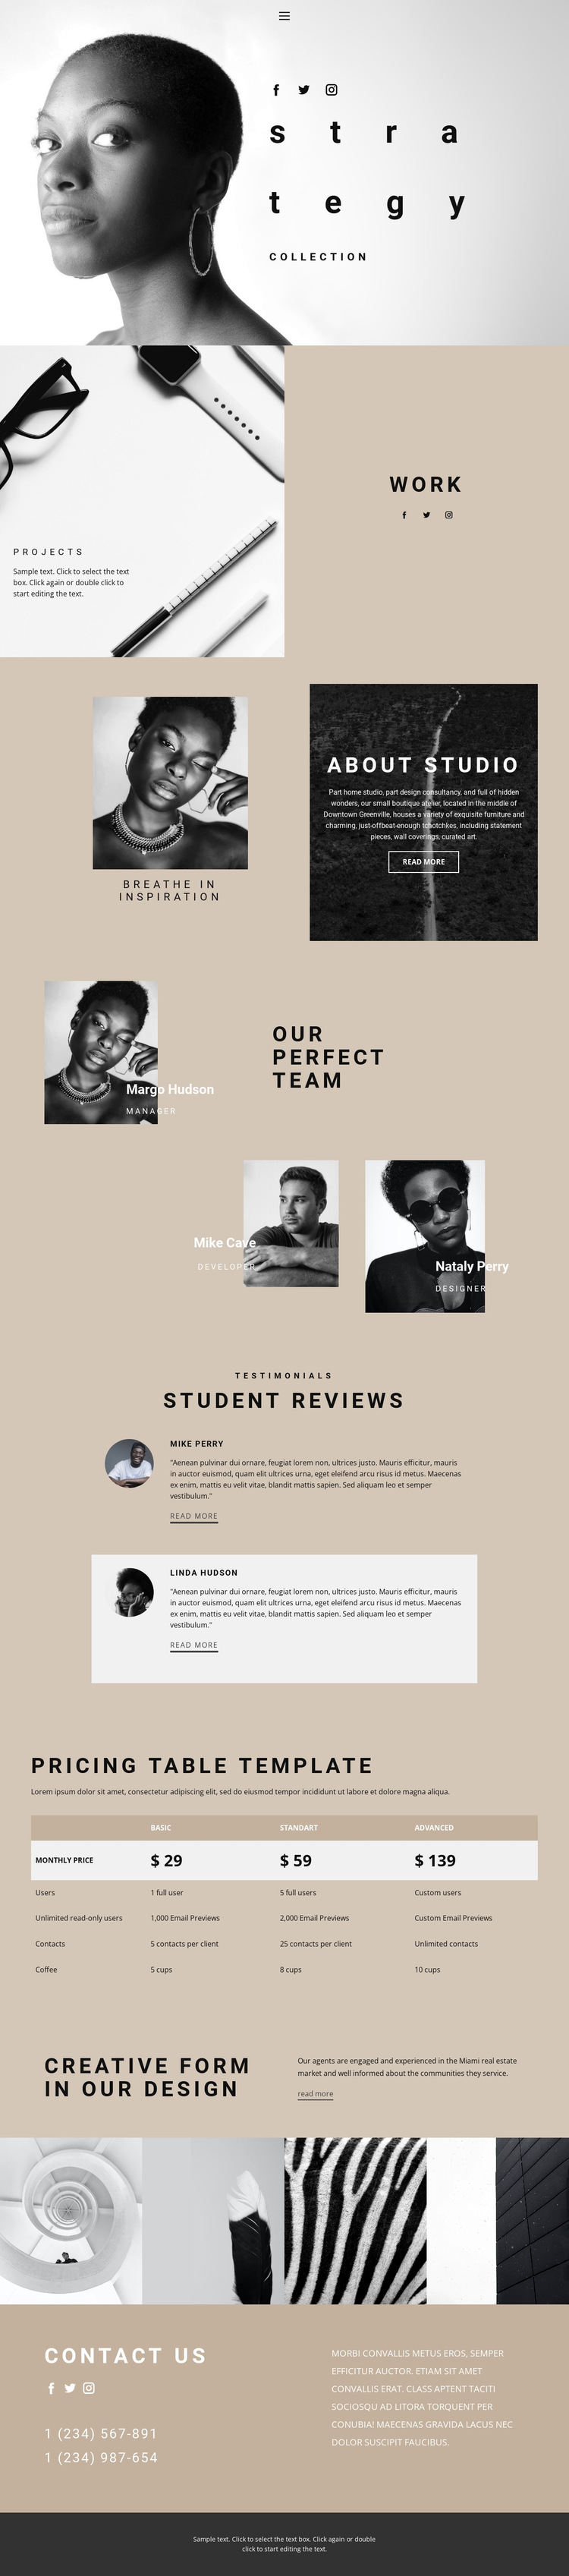 Strategy and grow HTML5 Template